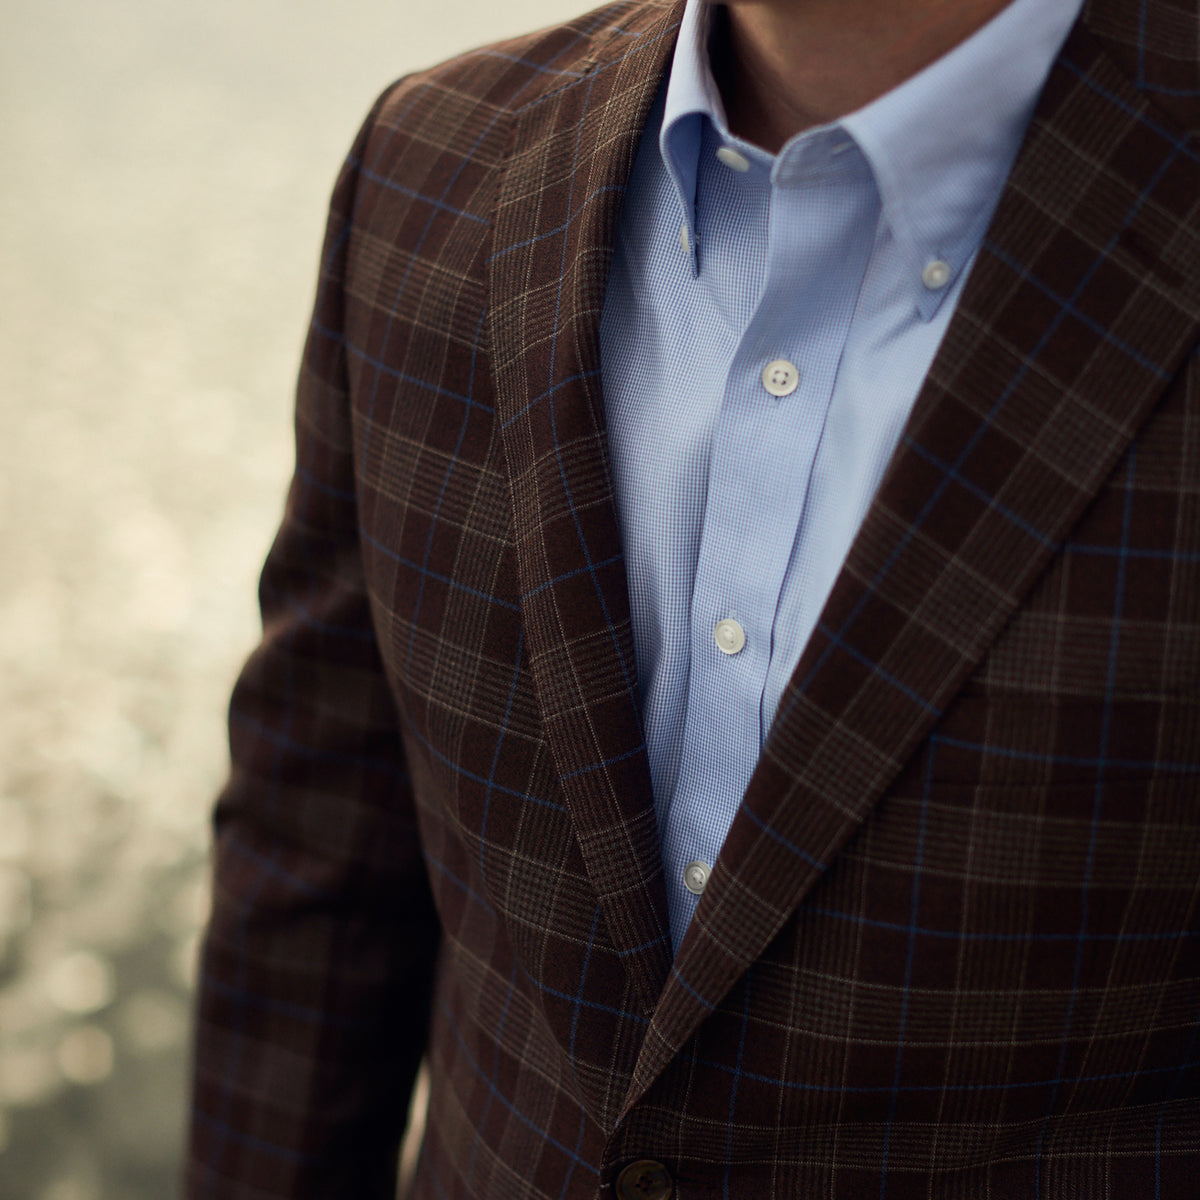 Warm chestnut tones and a hint of blue, the perfect blend and just the right balance. Lightweight construction keeps this look preppy without being stuffy.  100% Lt. Weight Wool • Natural Shoulder • Two Button • Flap Pockets • 1/4 Lined • Side Vents • Notch Label • Dry Clean Only • Made in USA🇺🇲